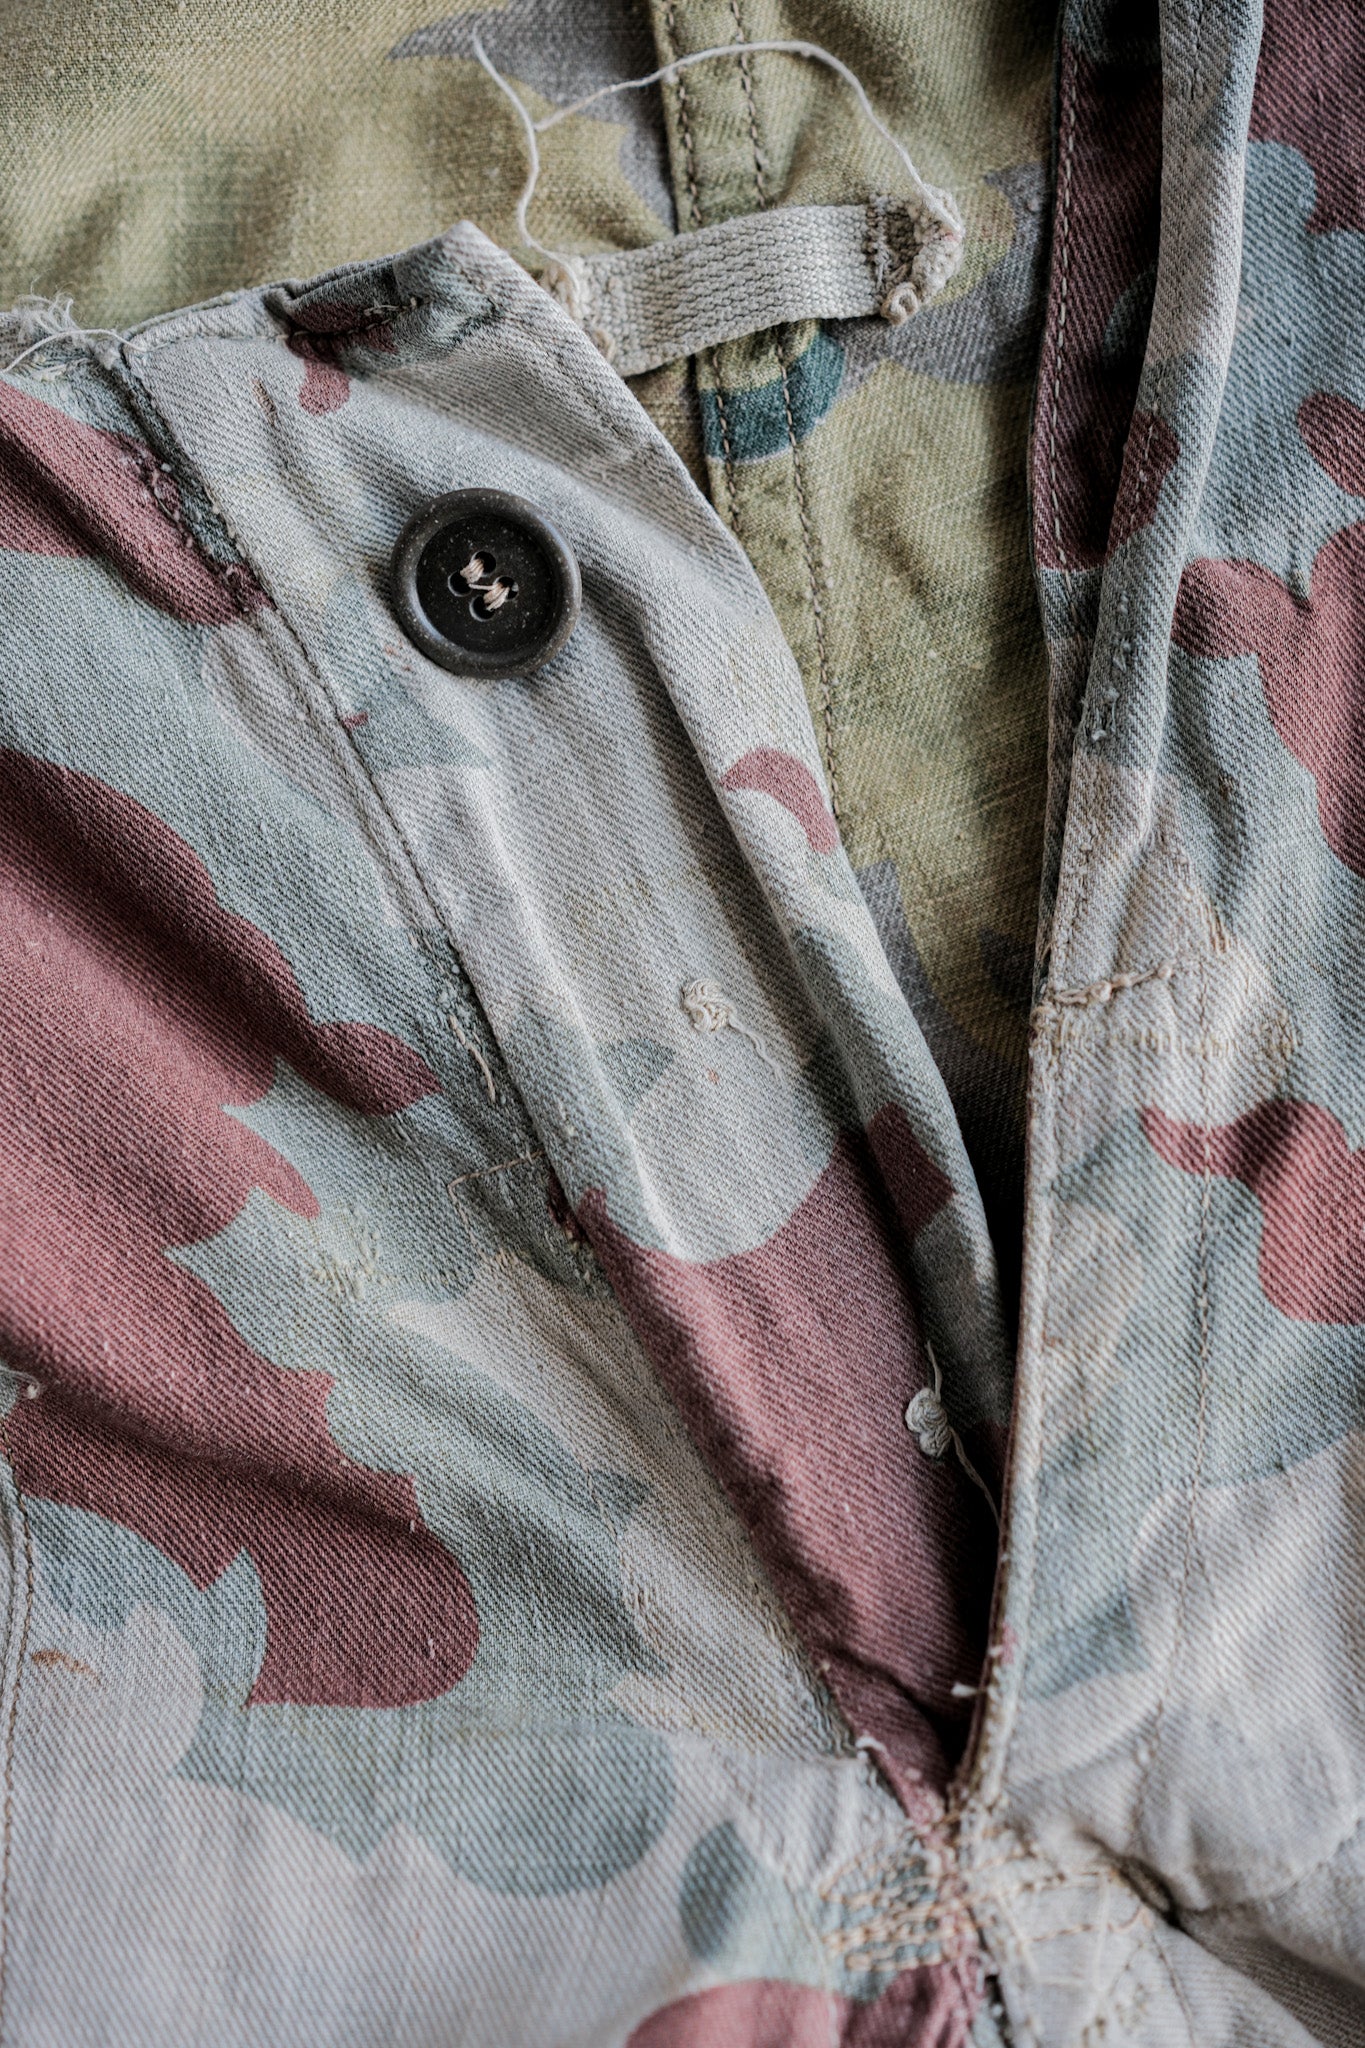 [~ 50's] Czechoslovakian Army Clouds Camouflage Reversible Trousers "Modified"